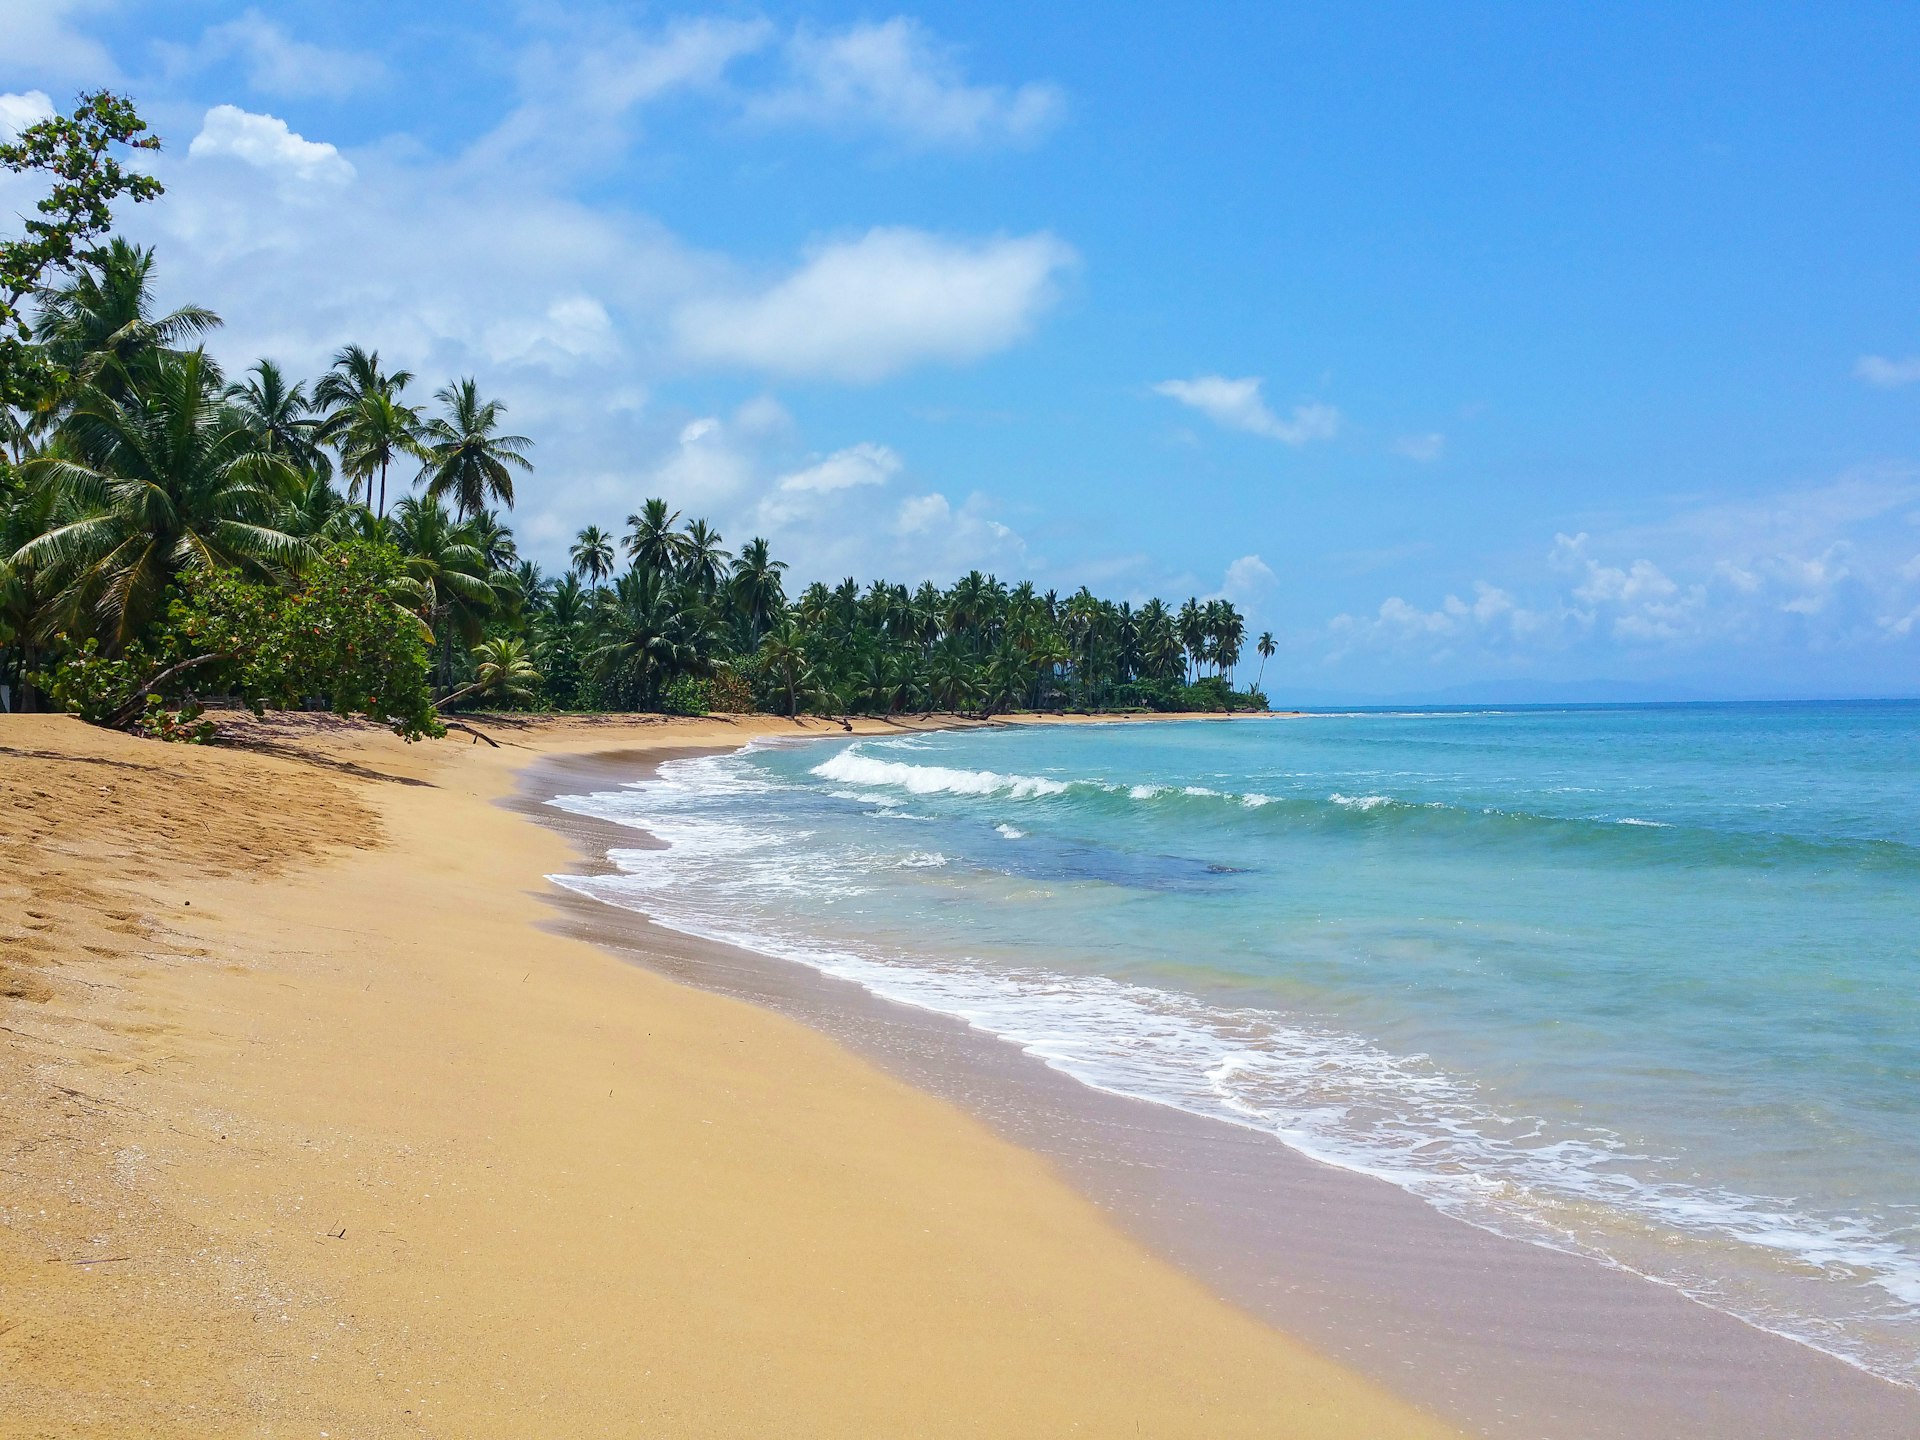 The golden sands of Coson Beach in the Dominican Republic